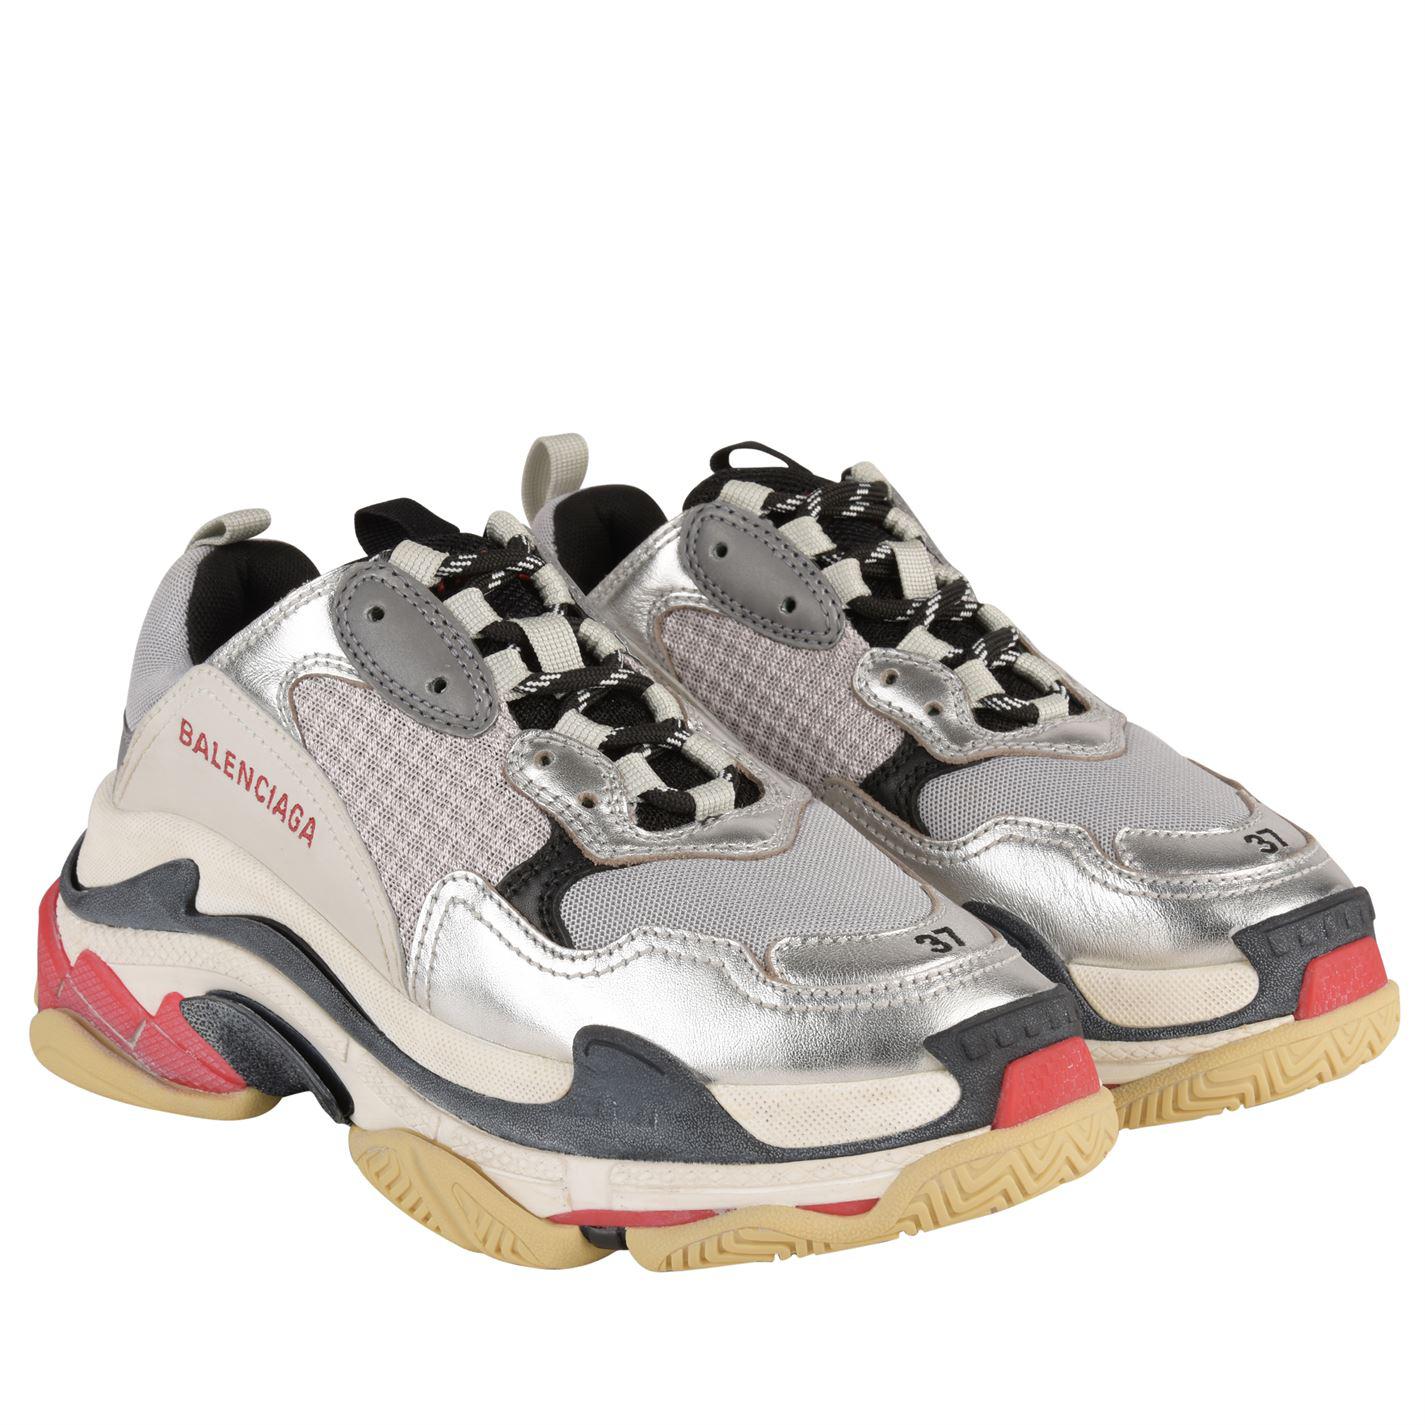 Balenciaga Triple S Low Top Sneaker Products in 2019